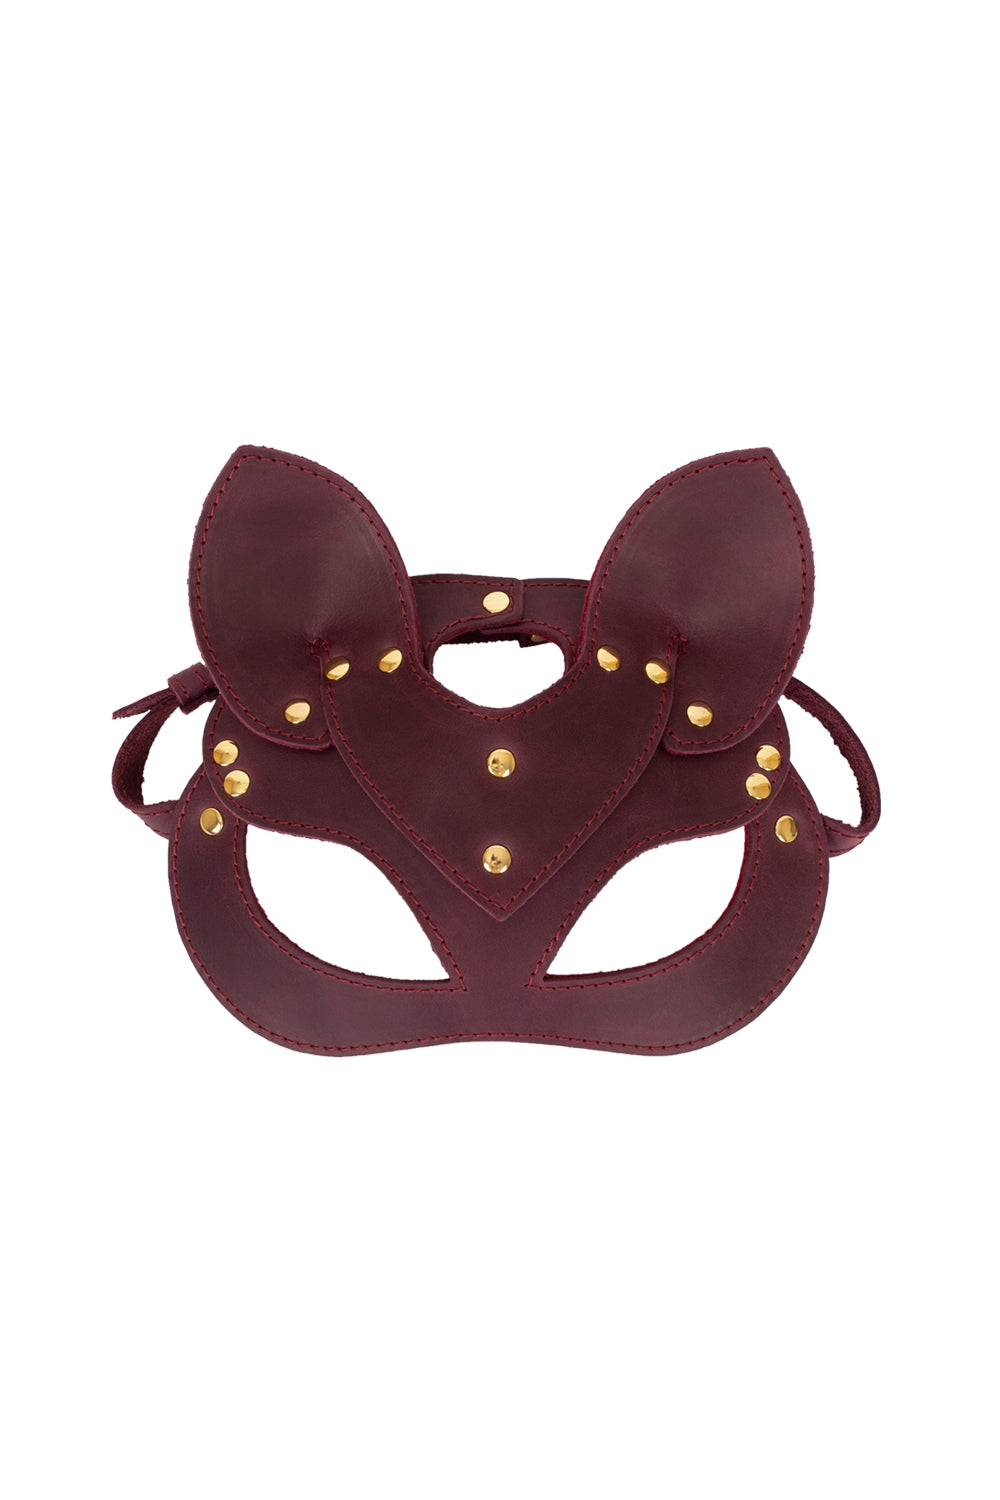 CRAZY HORSE Leather cat mask. 10 colors